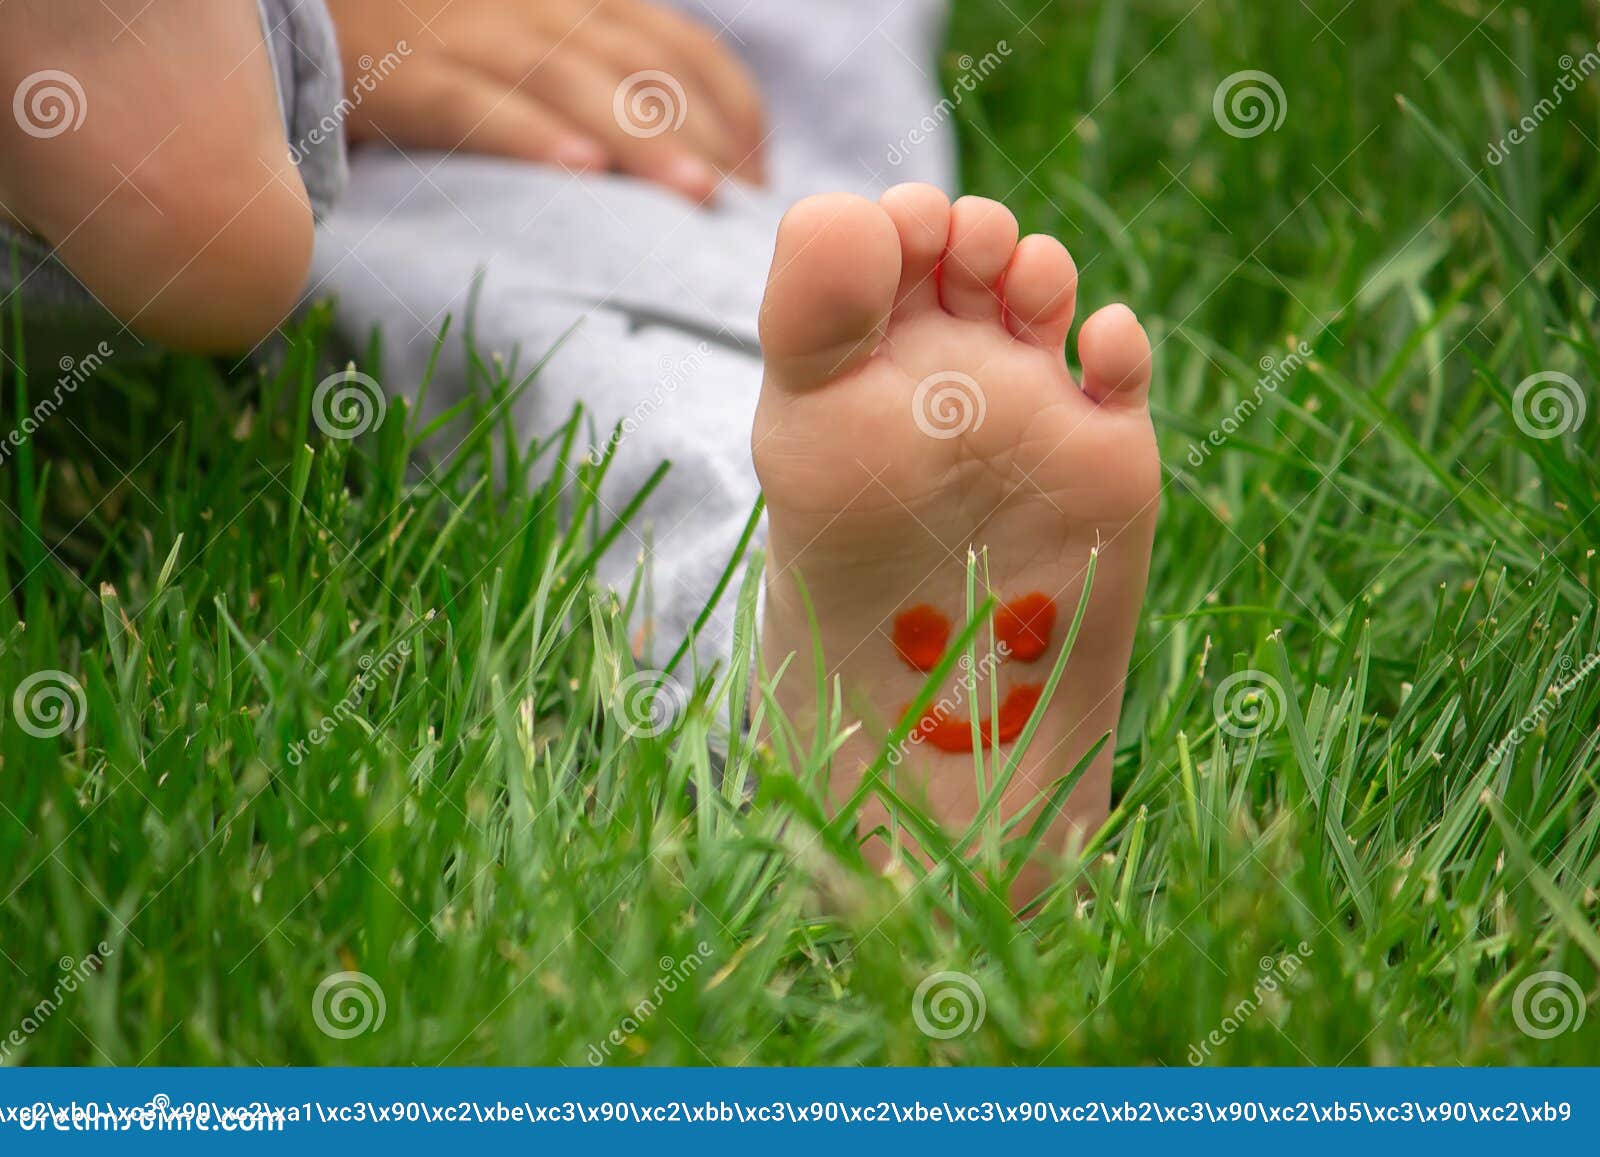 Child Sitting On The Grass Smiling On The Childand X27s Leg With Paints